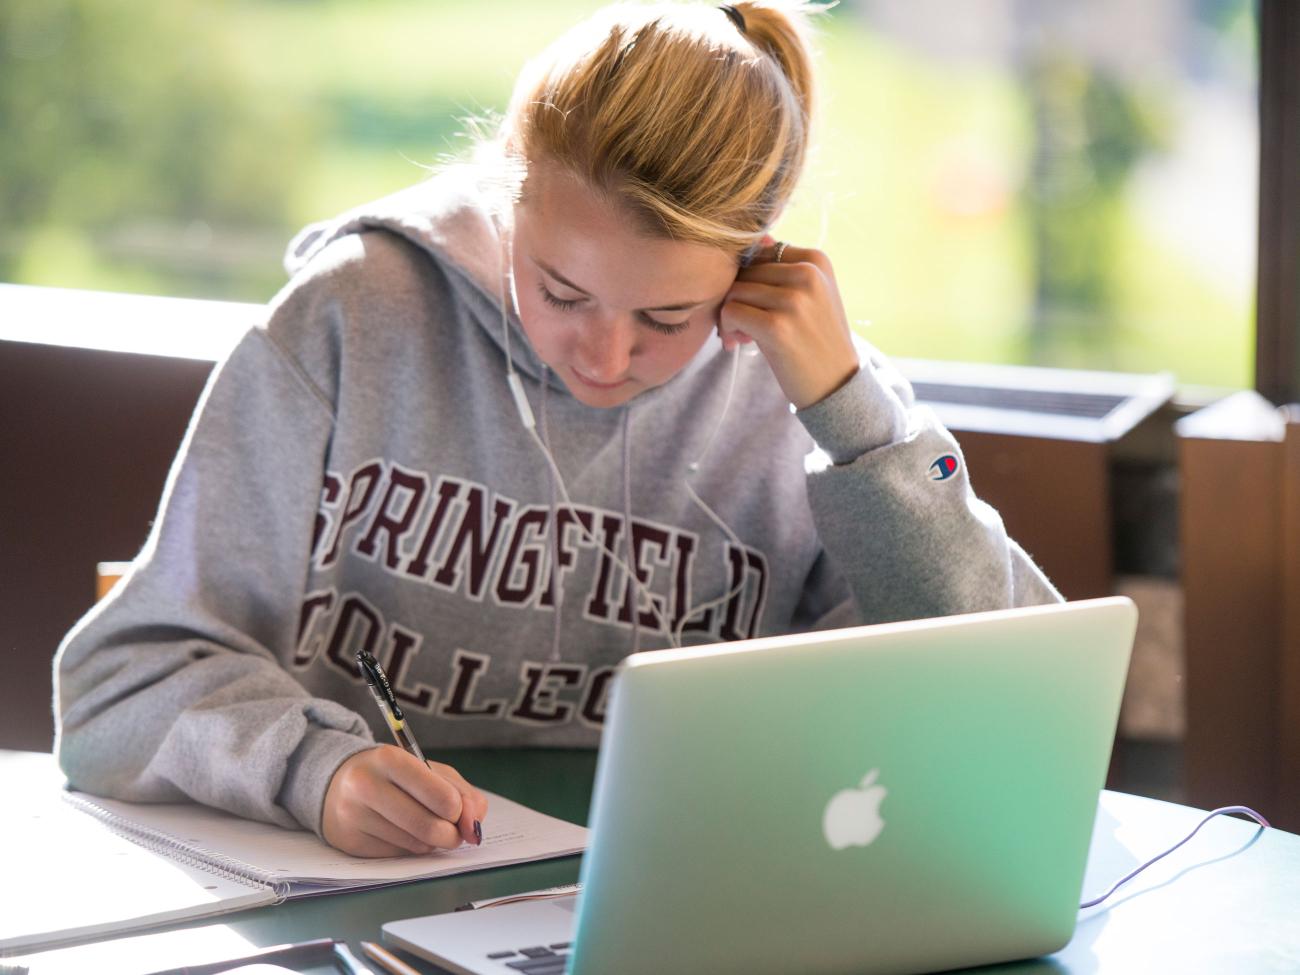 A student writes in a notebook at a desk with a laptop open in front of her.